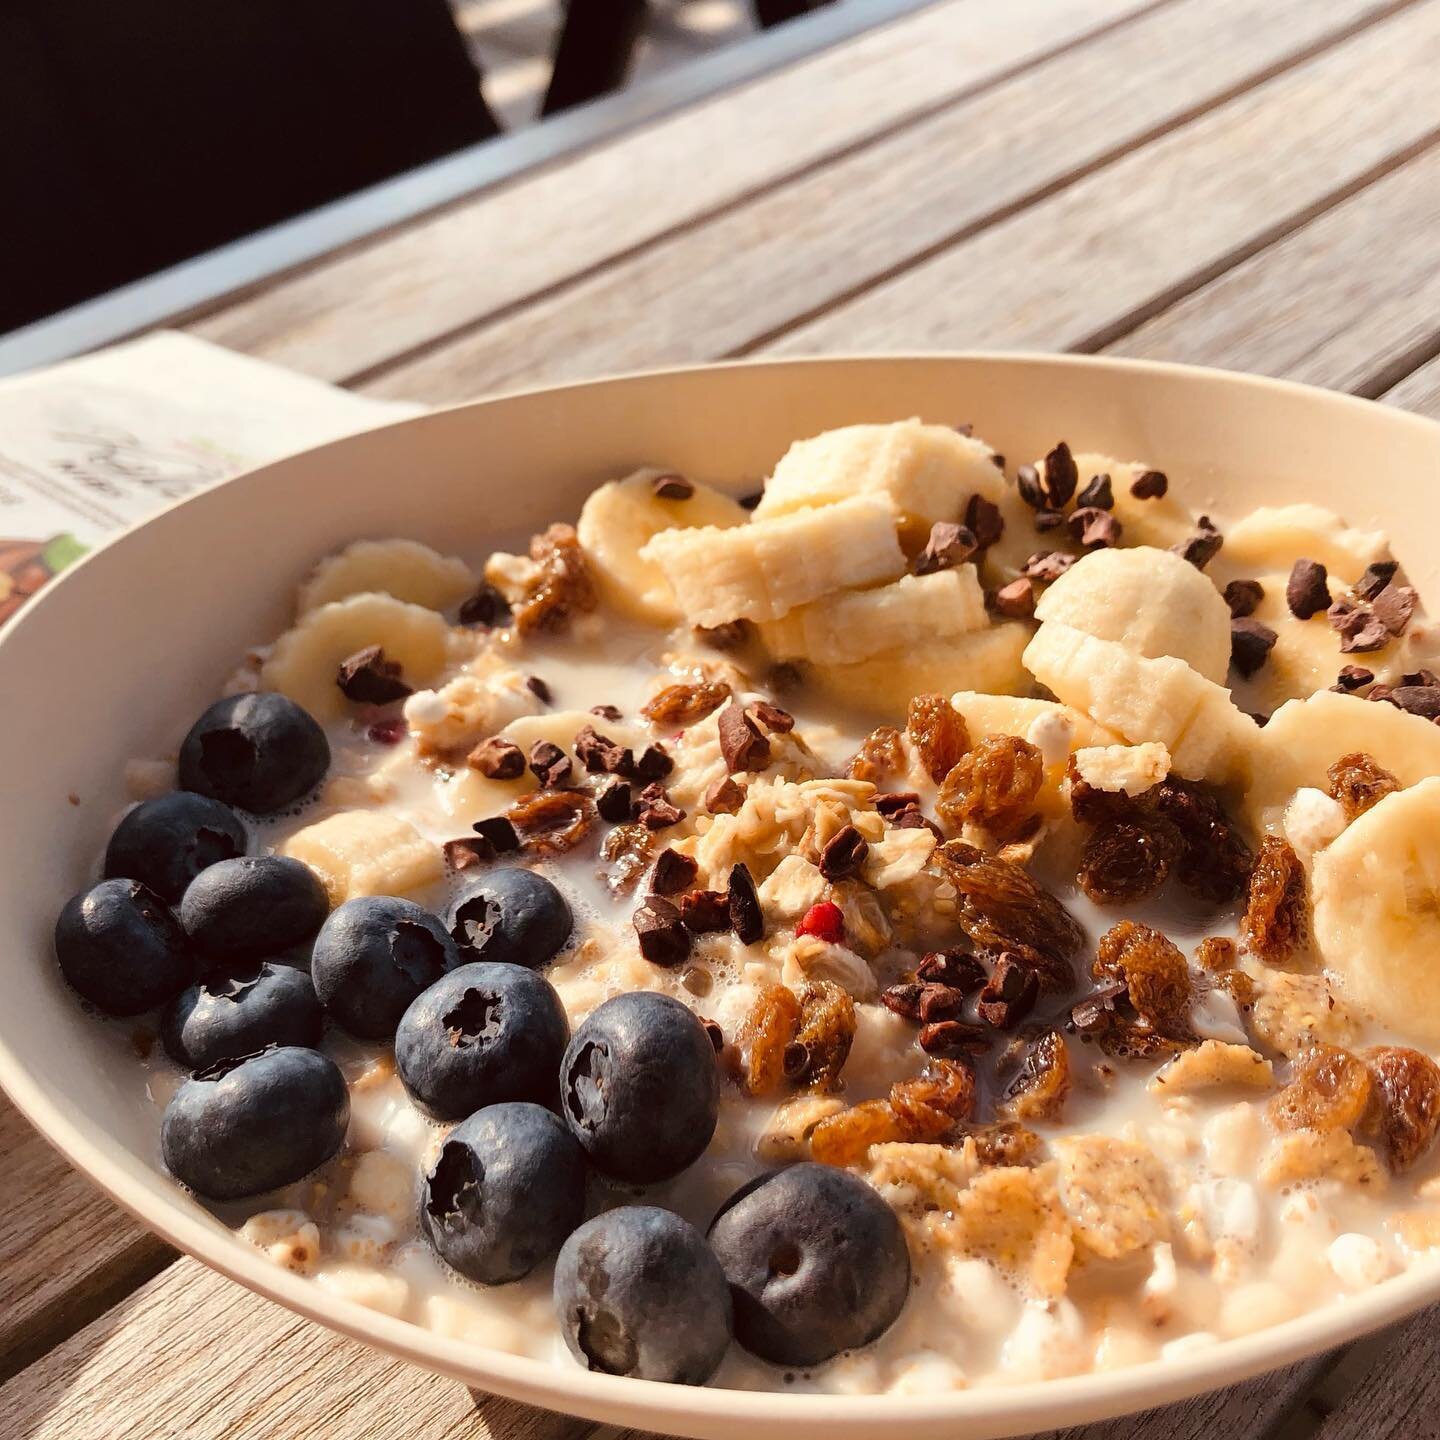 #happysunday and here a #breakfast variation #oatbowl with #kakaonibs. Can you feel the energy?
I have to admit I am usually a breakfast skipper and only have a #greentea or #coffee and sometimes a #greensmoothie in the morning, but Sundays we enjoy 